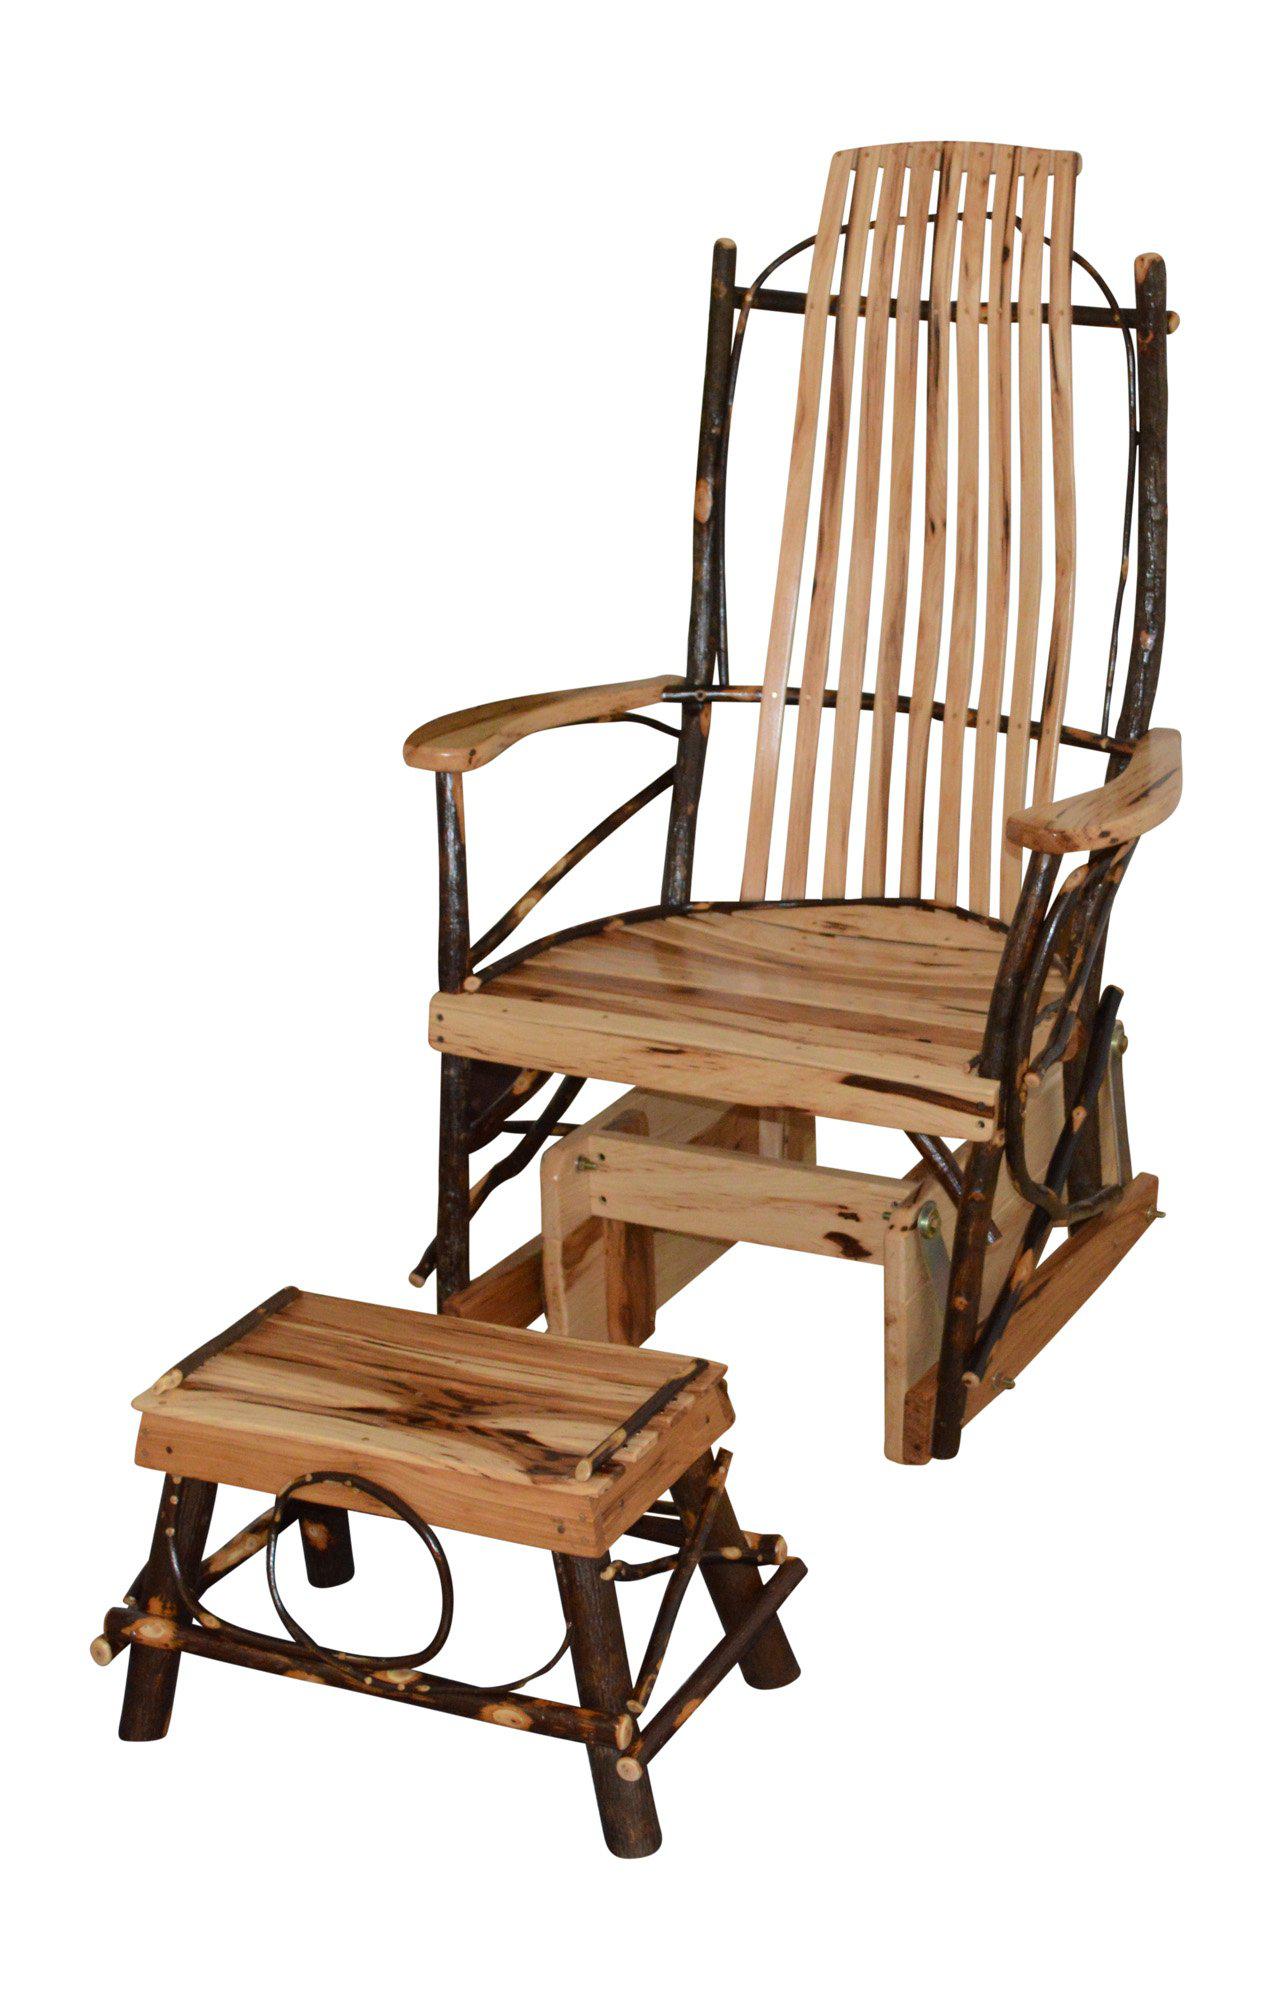 A&L Furniture Co. Amish Bentwood Hickory Glider Rocker with Foot Stool Set - LEAD TIME TO SHIP 10 BUSINESS DAYS